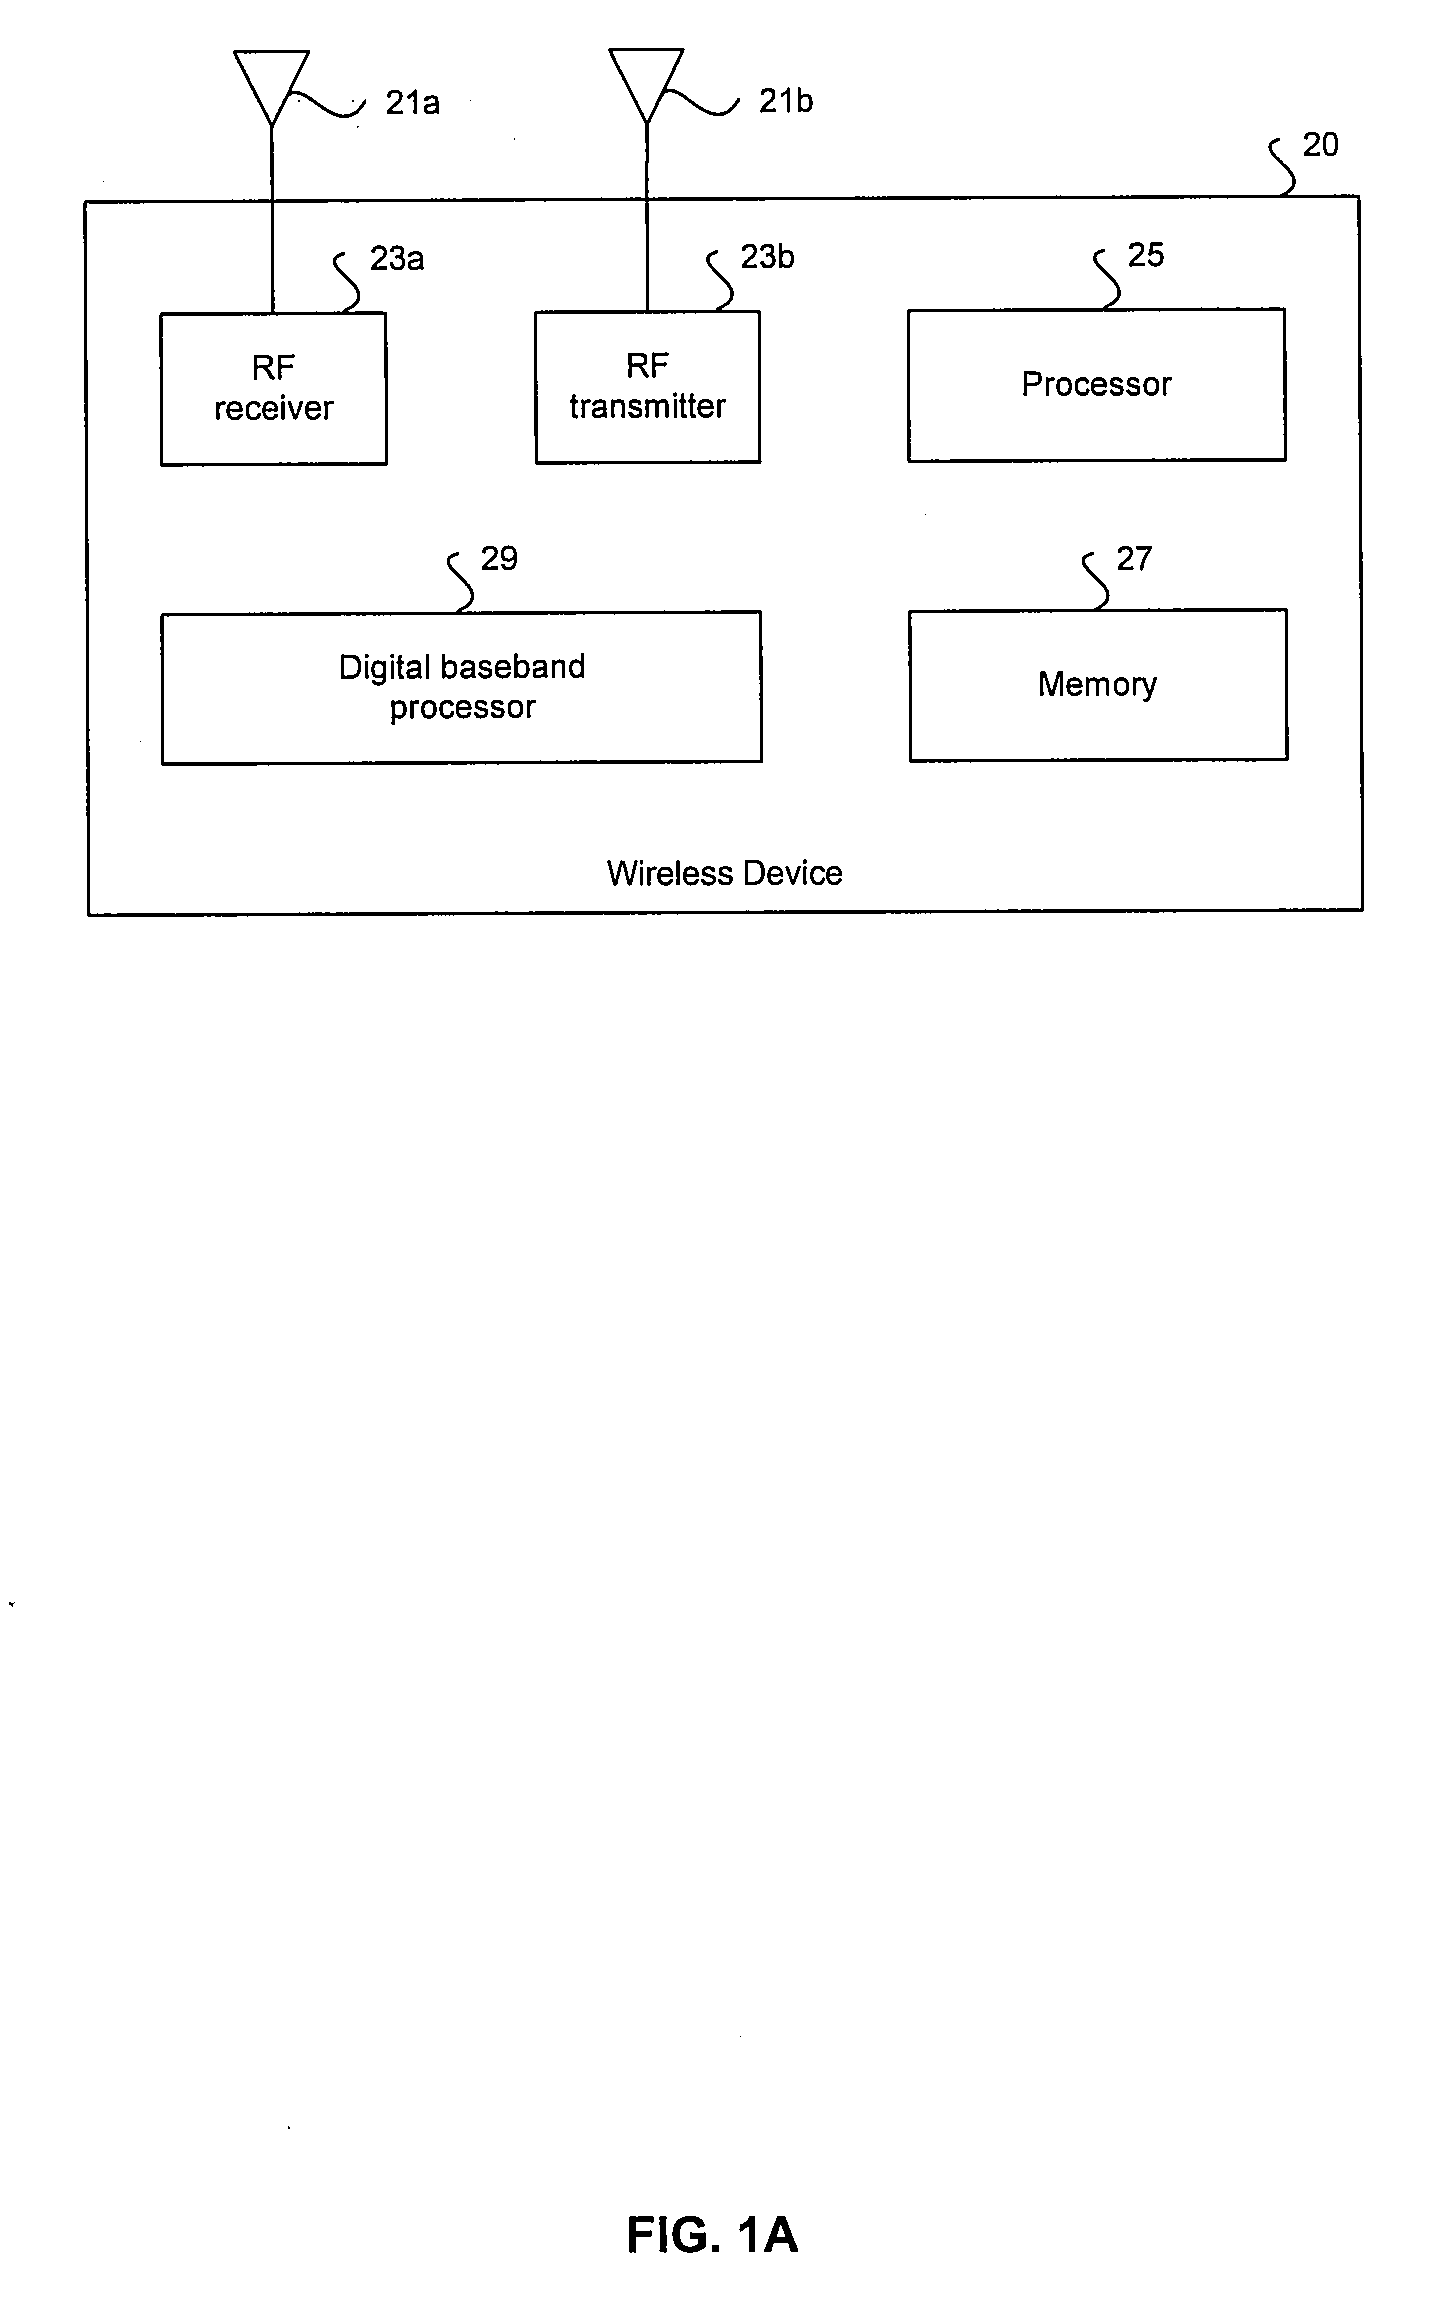 Method And System For On-Demand Filtering In A Receiver